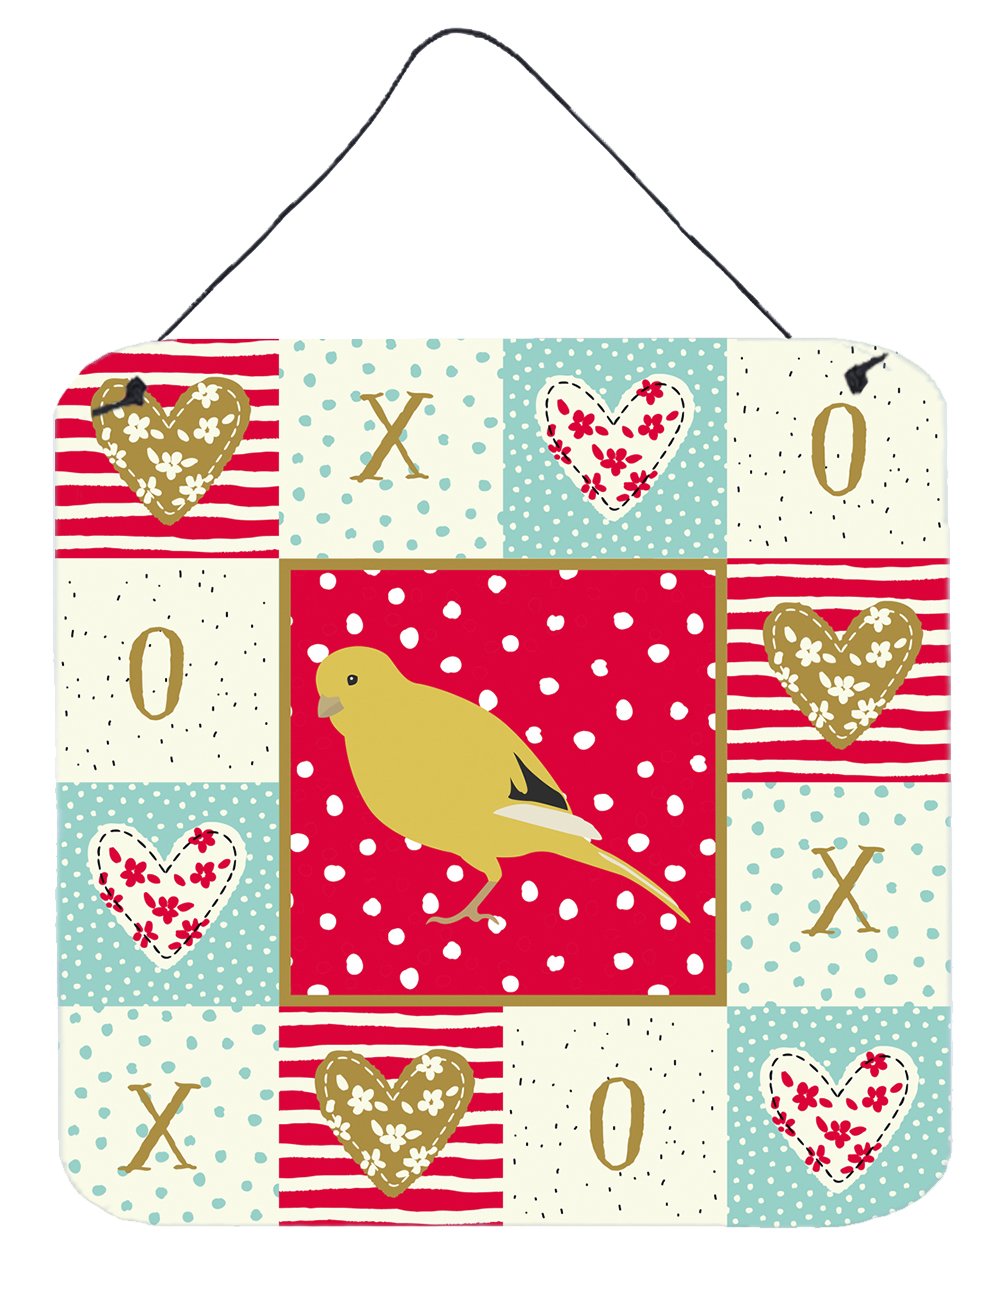 Border Canary Love Wall or Door Hanging Prints CK5501DS66 by Caroline's Treasures